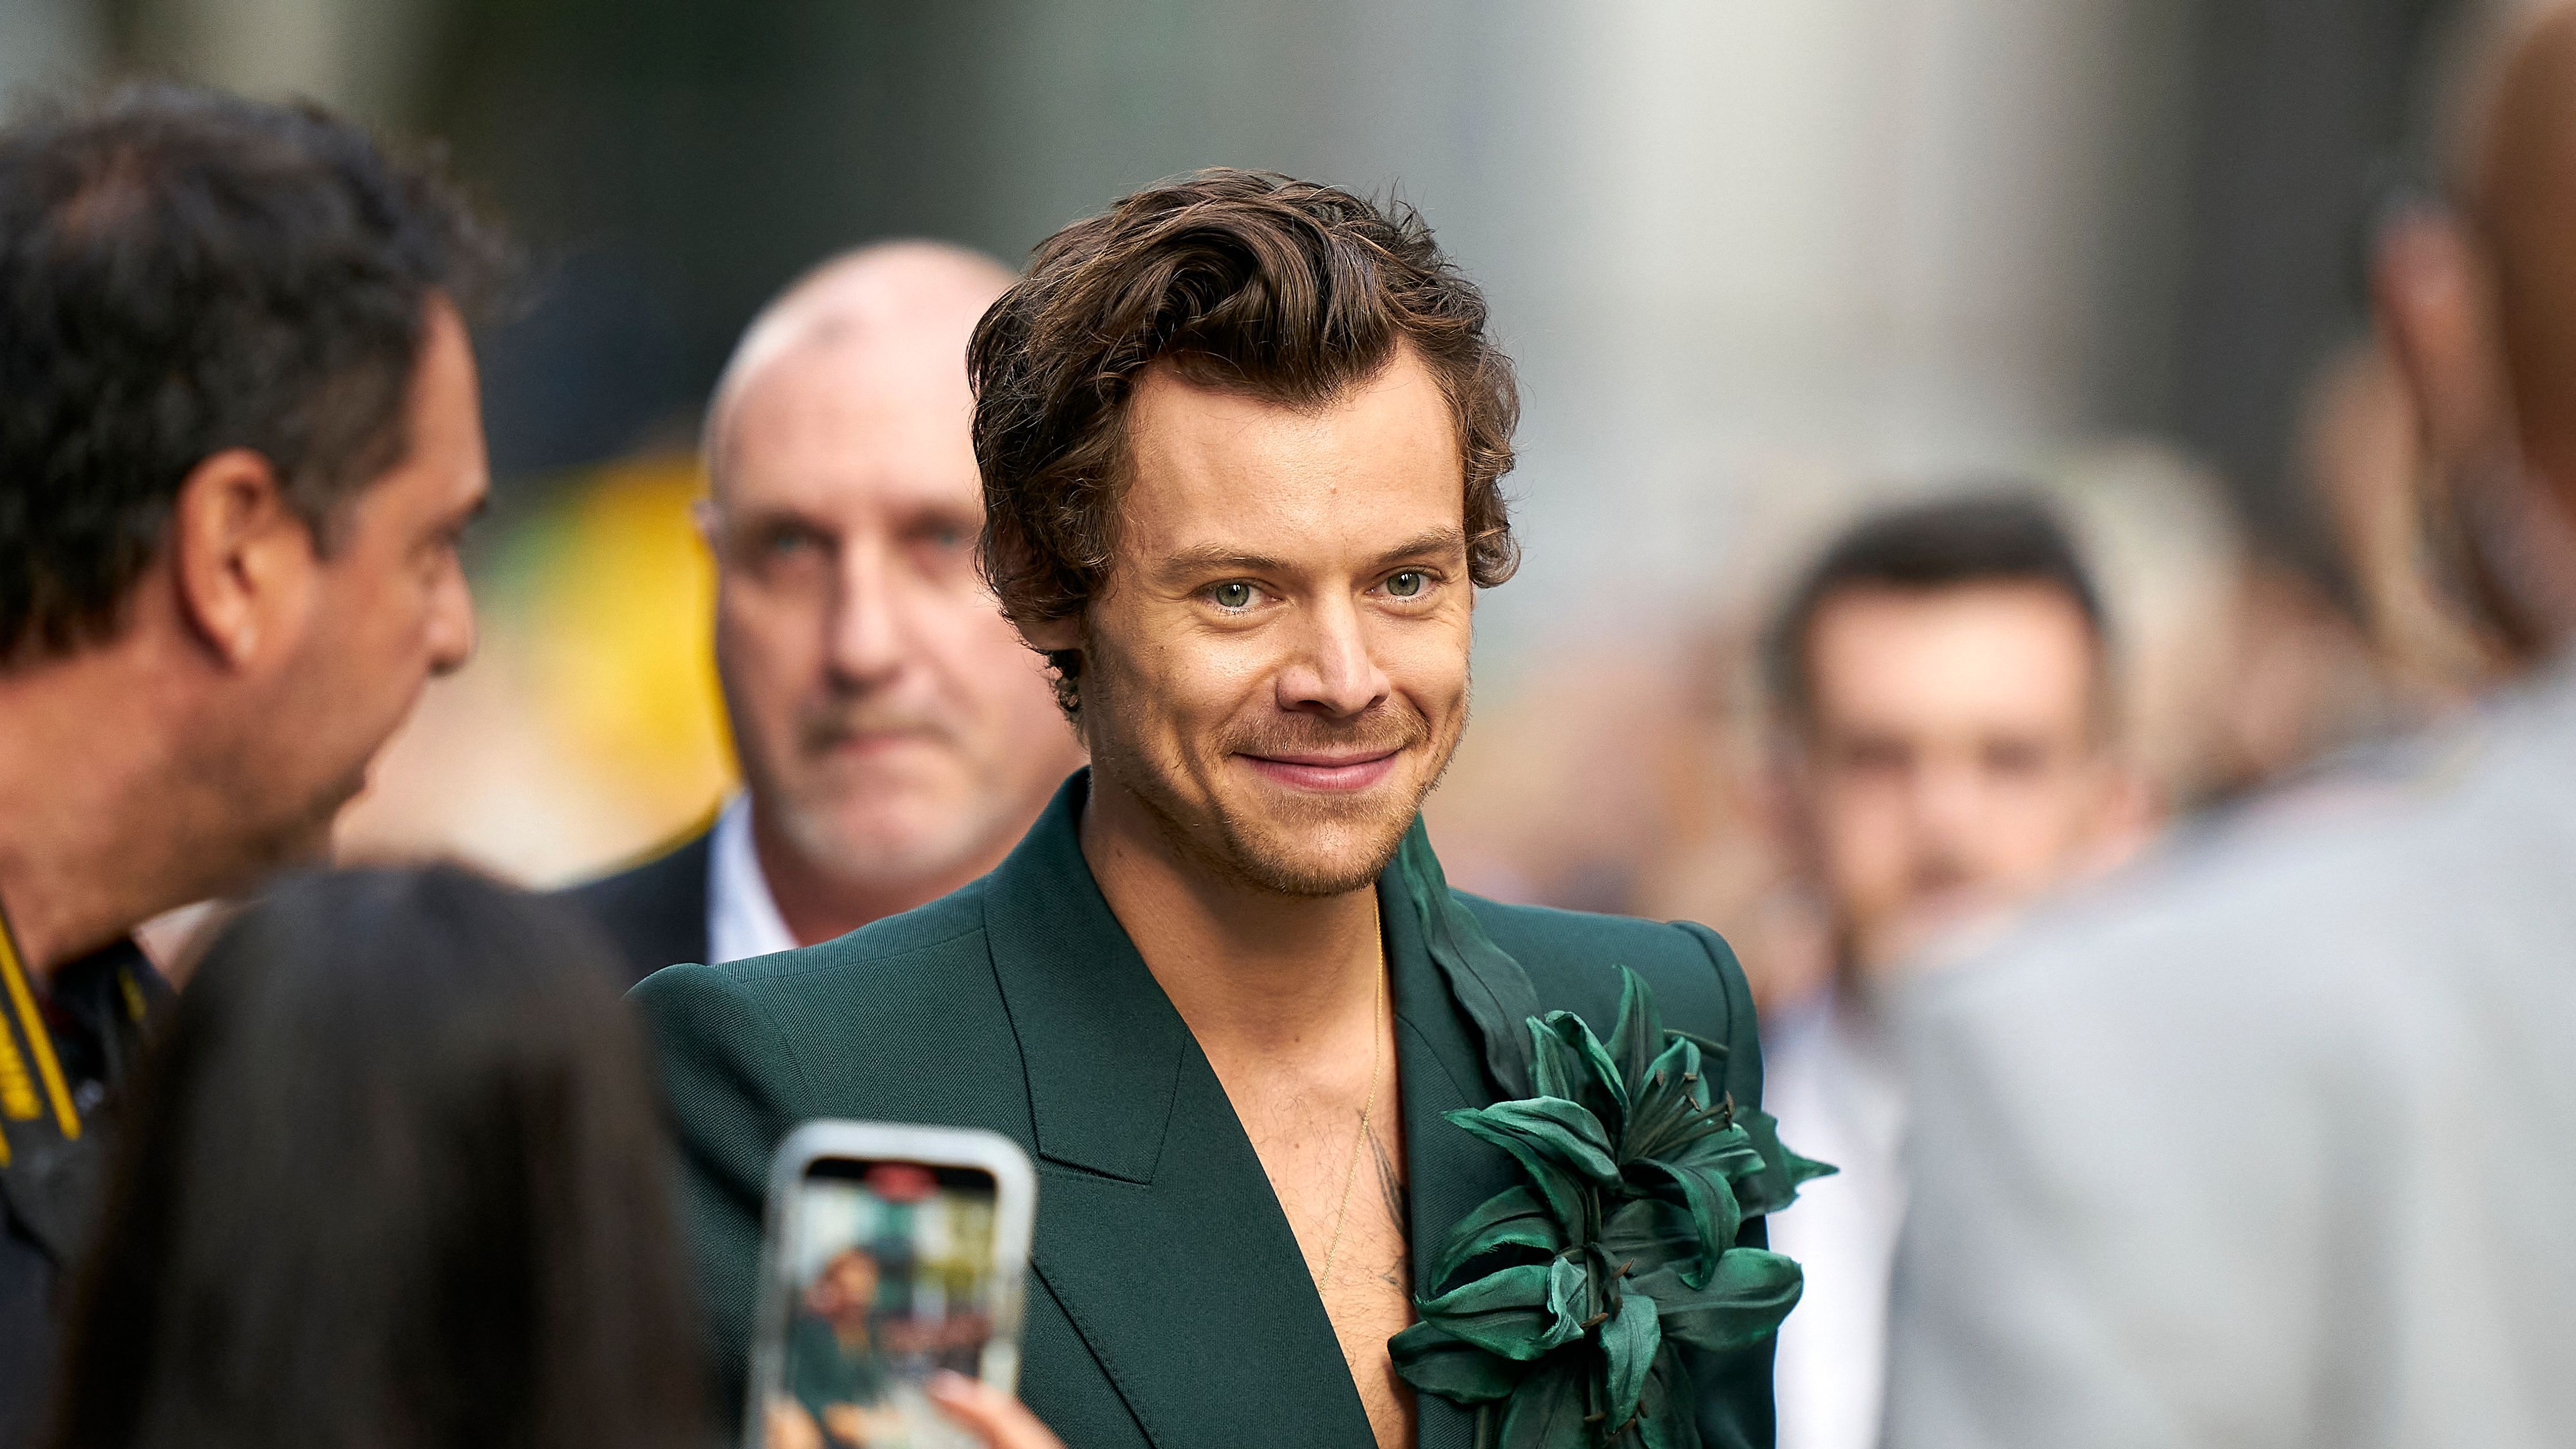 Harry Styles Wins His First Acting Award for "My Policeman"